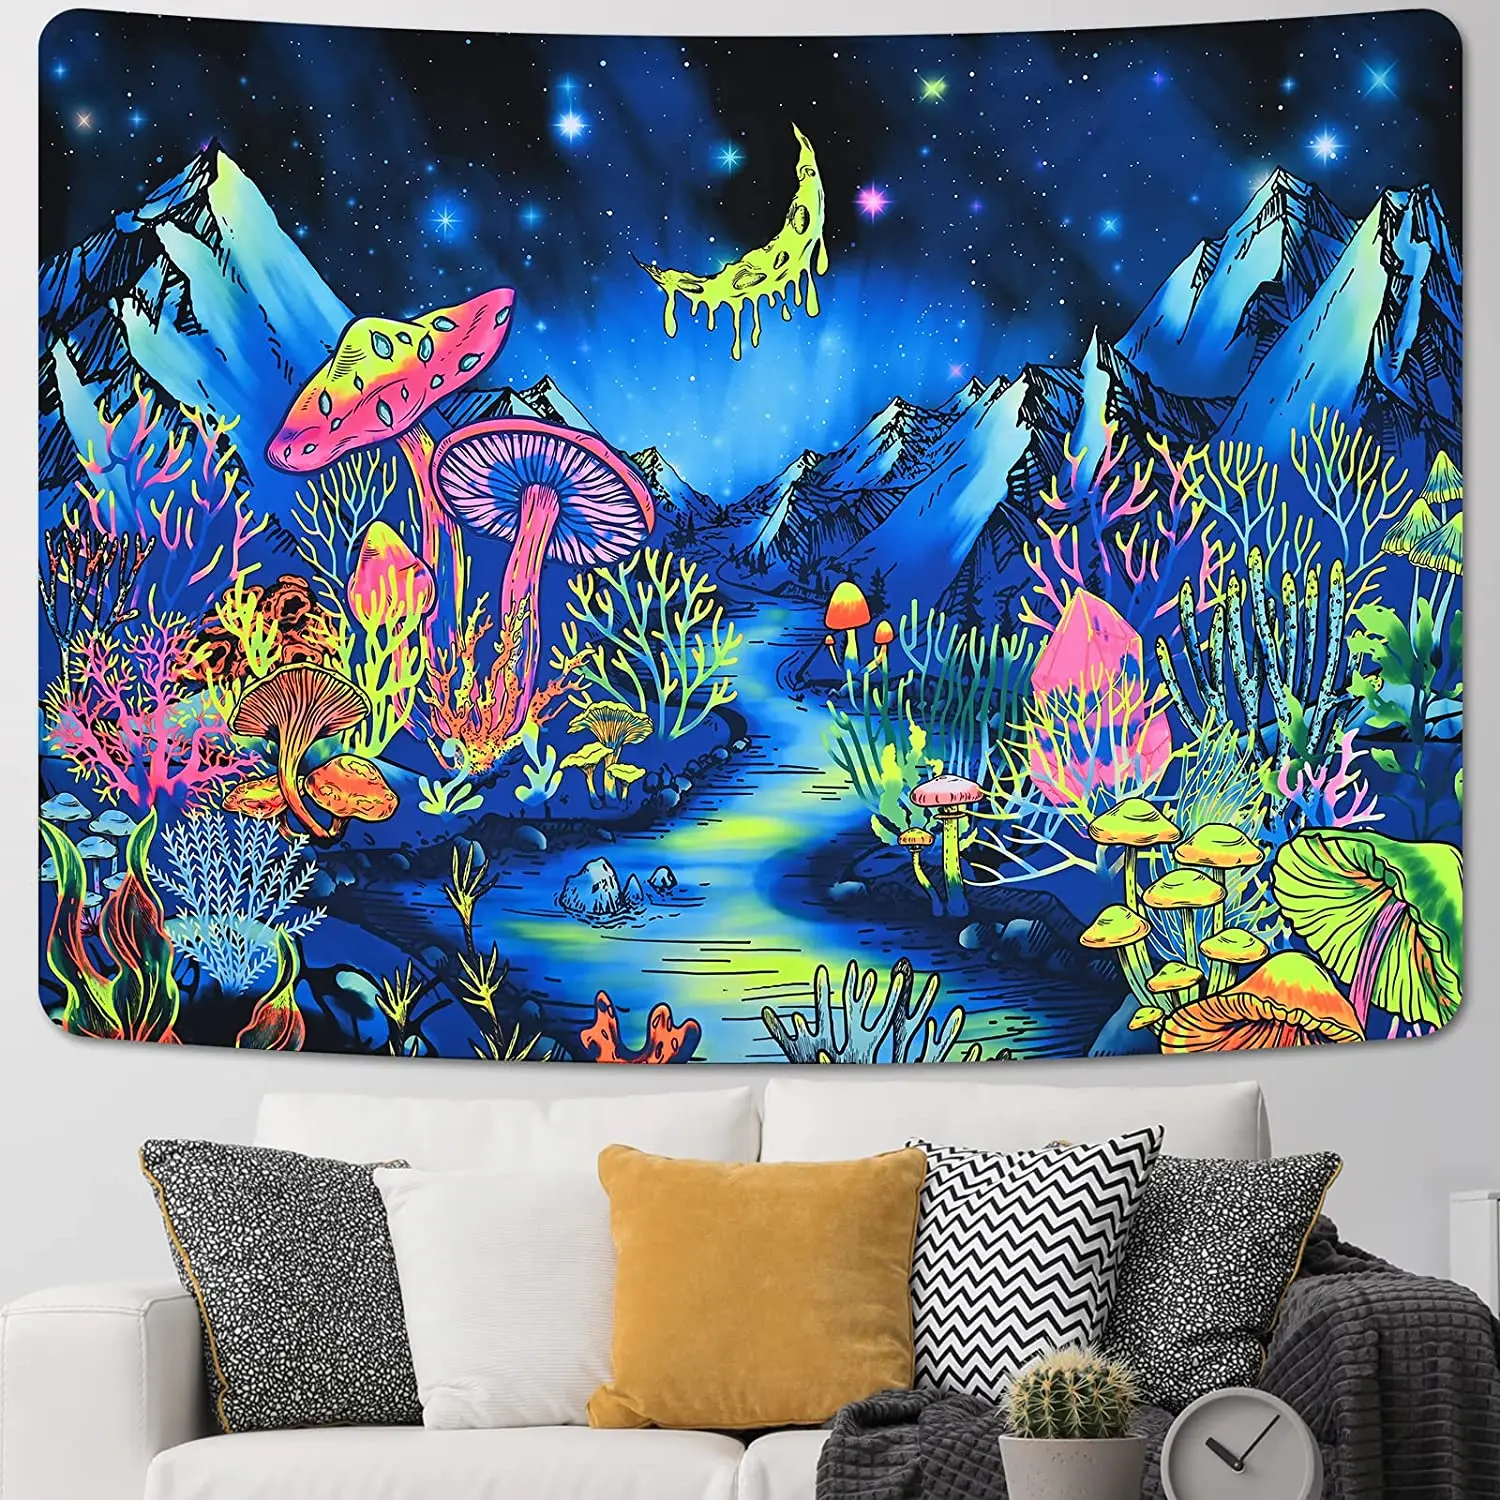 

Blacklight Mushroom Tapestry Psychedelic Fantasy Forest Tapestries Aesthetic Mountain UV Reactive Wall Hanging for Room Decor